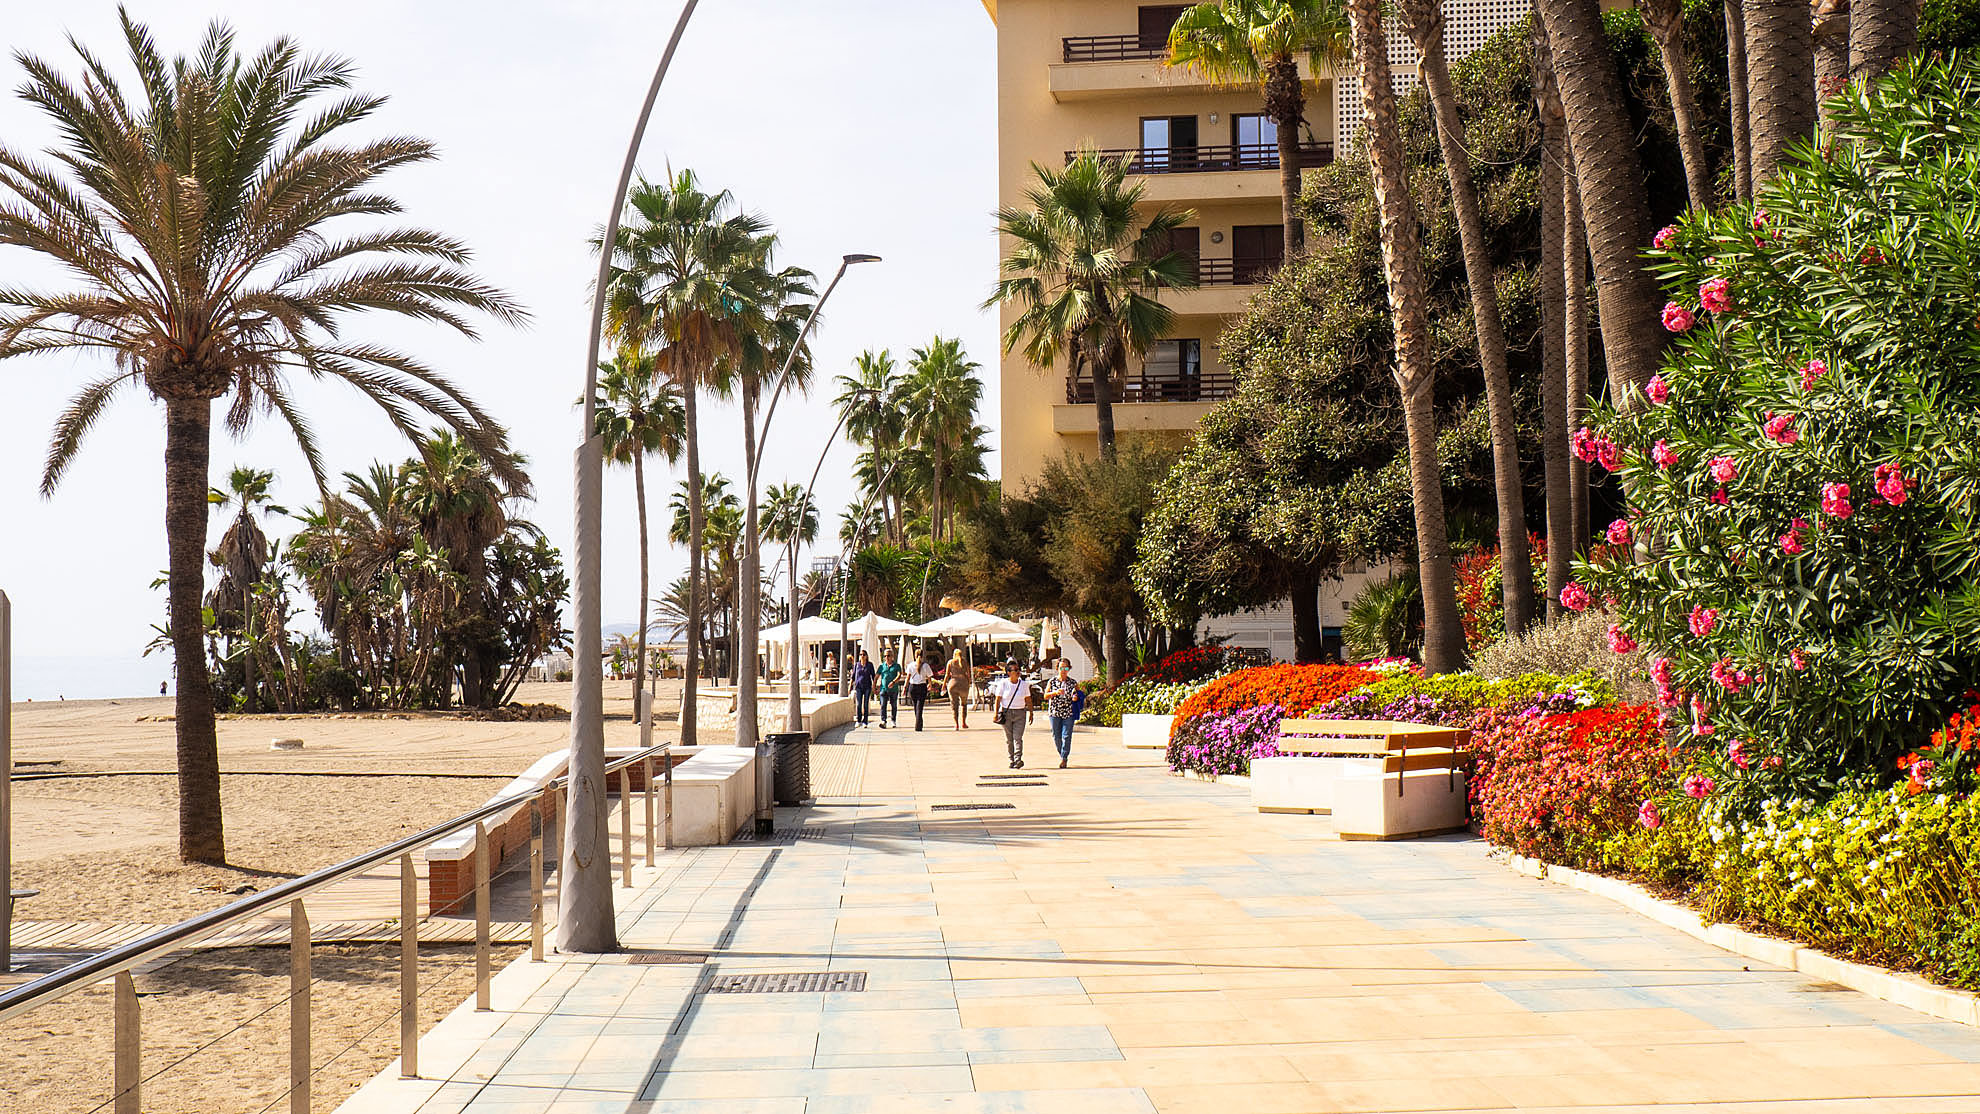 Sights in Estepona and the best tips for a visit